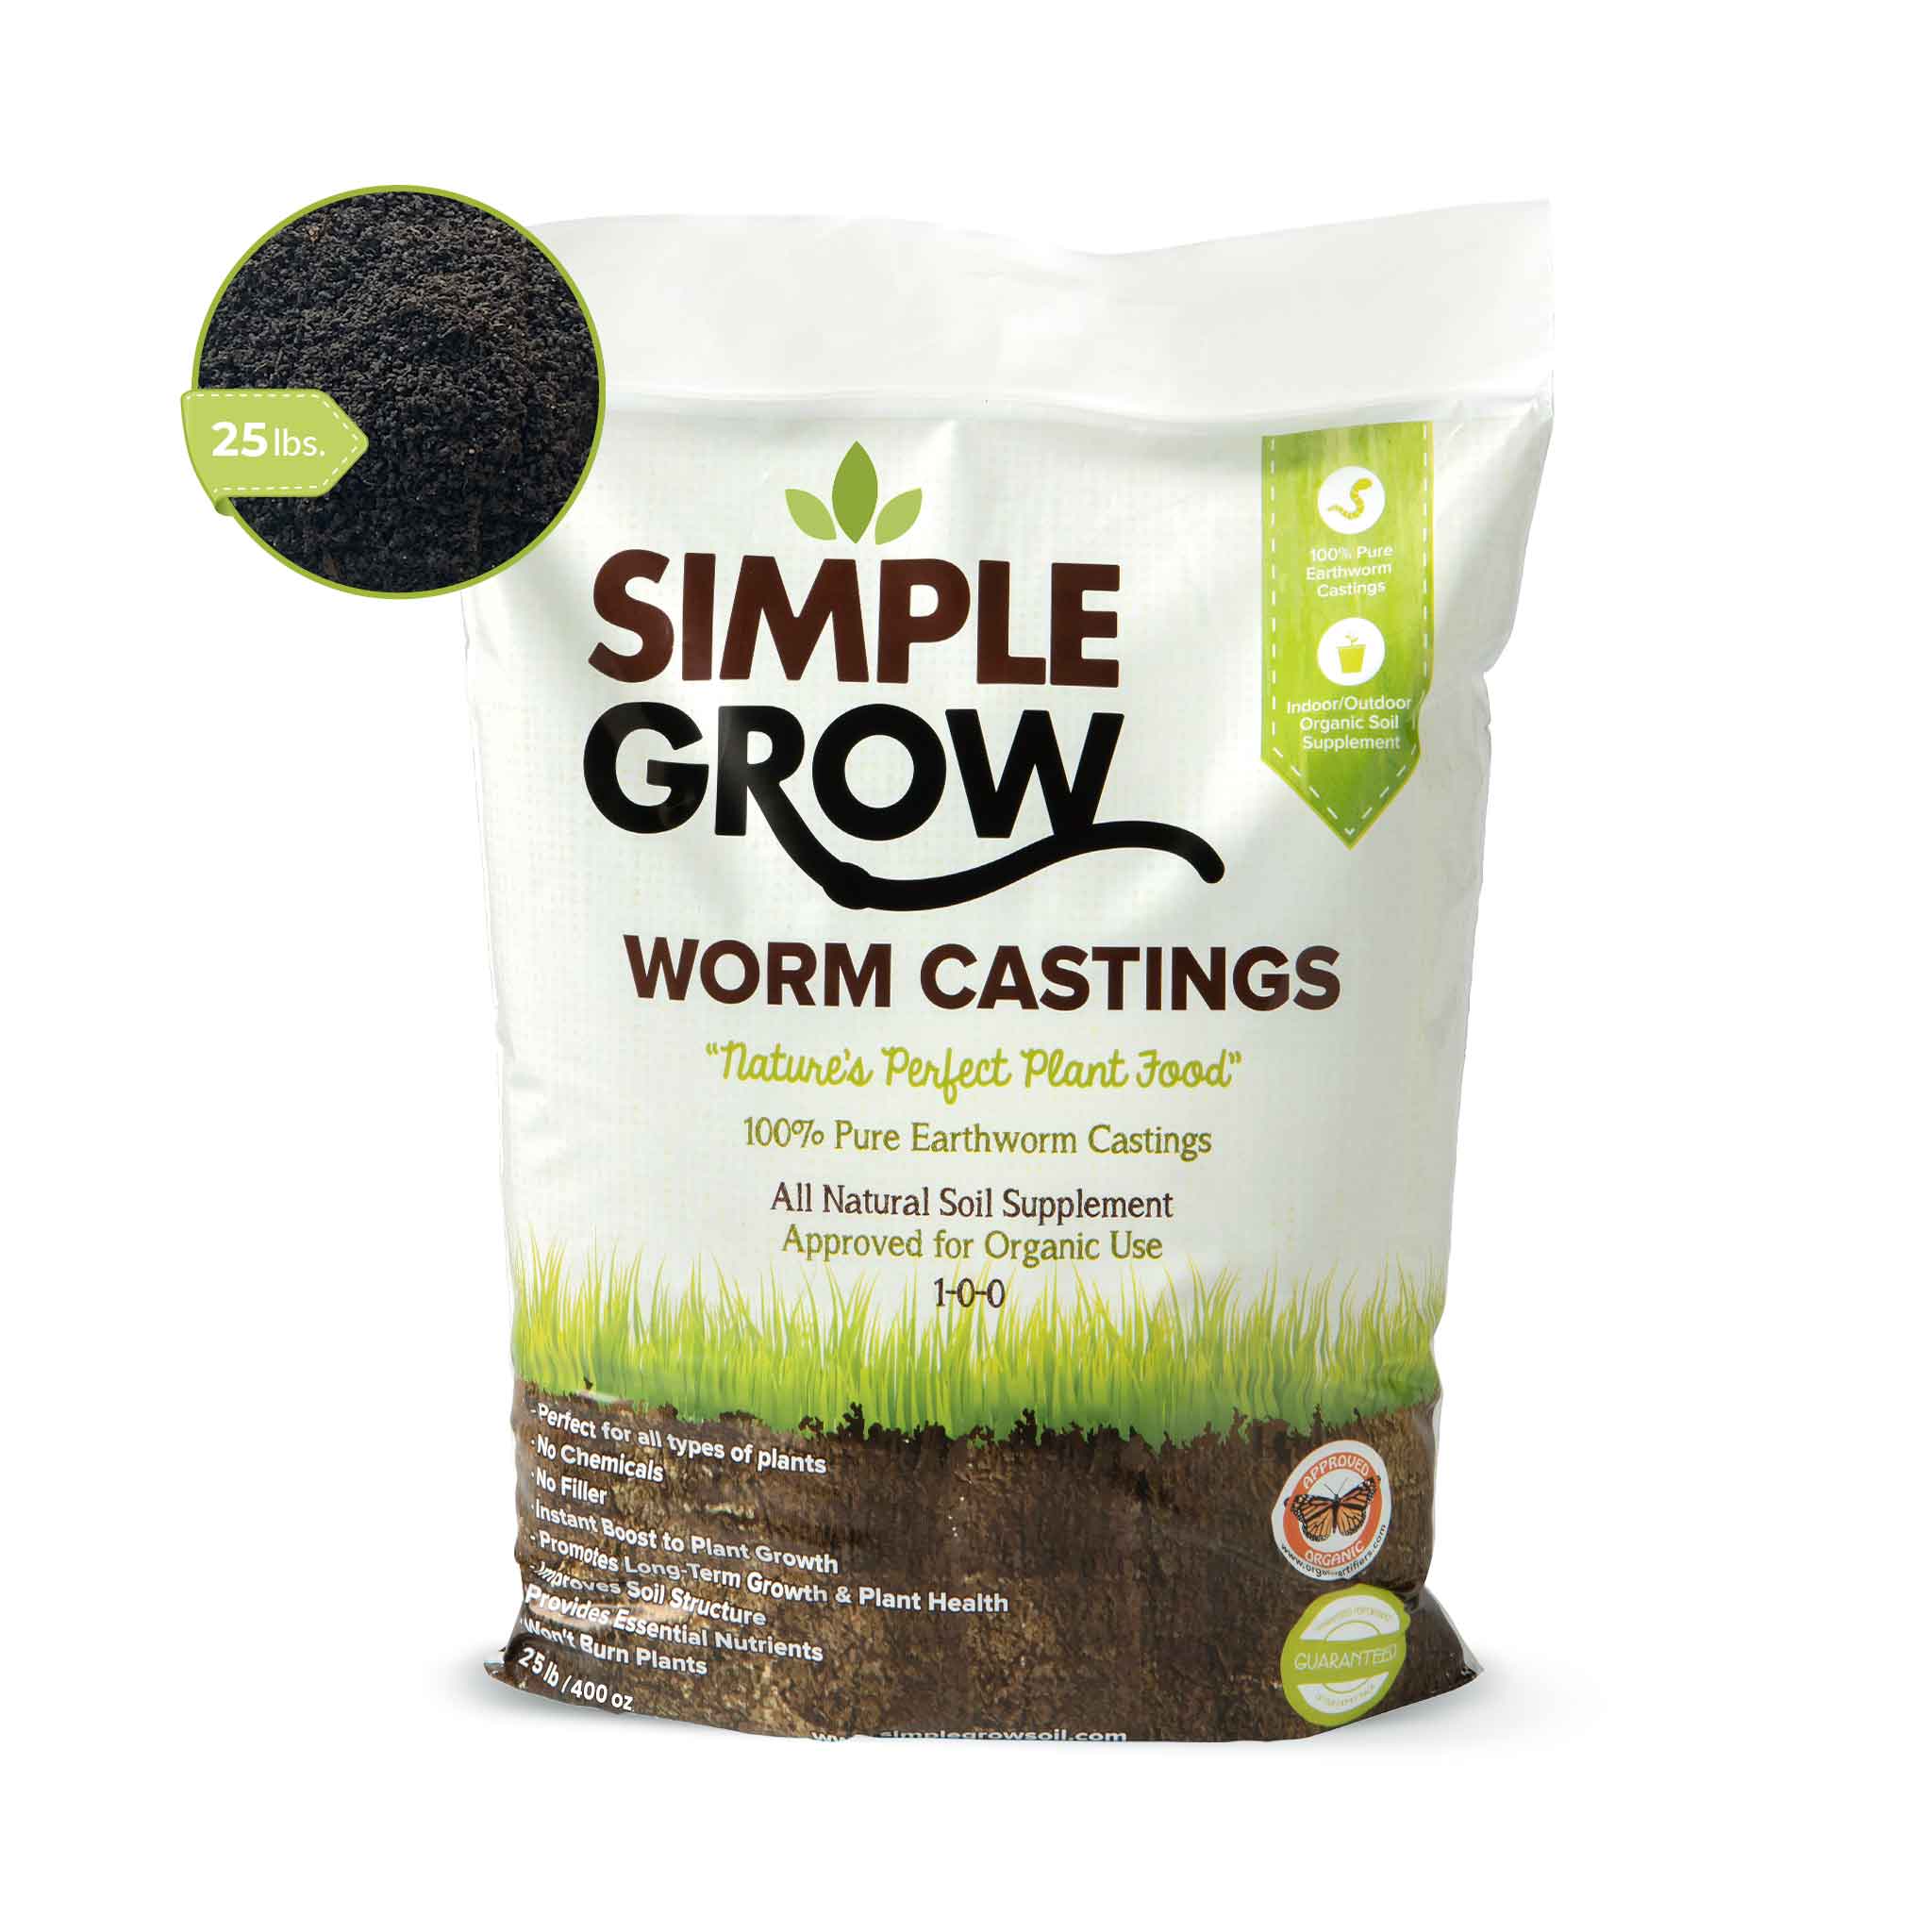 Image of Bag of worm castings